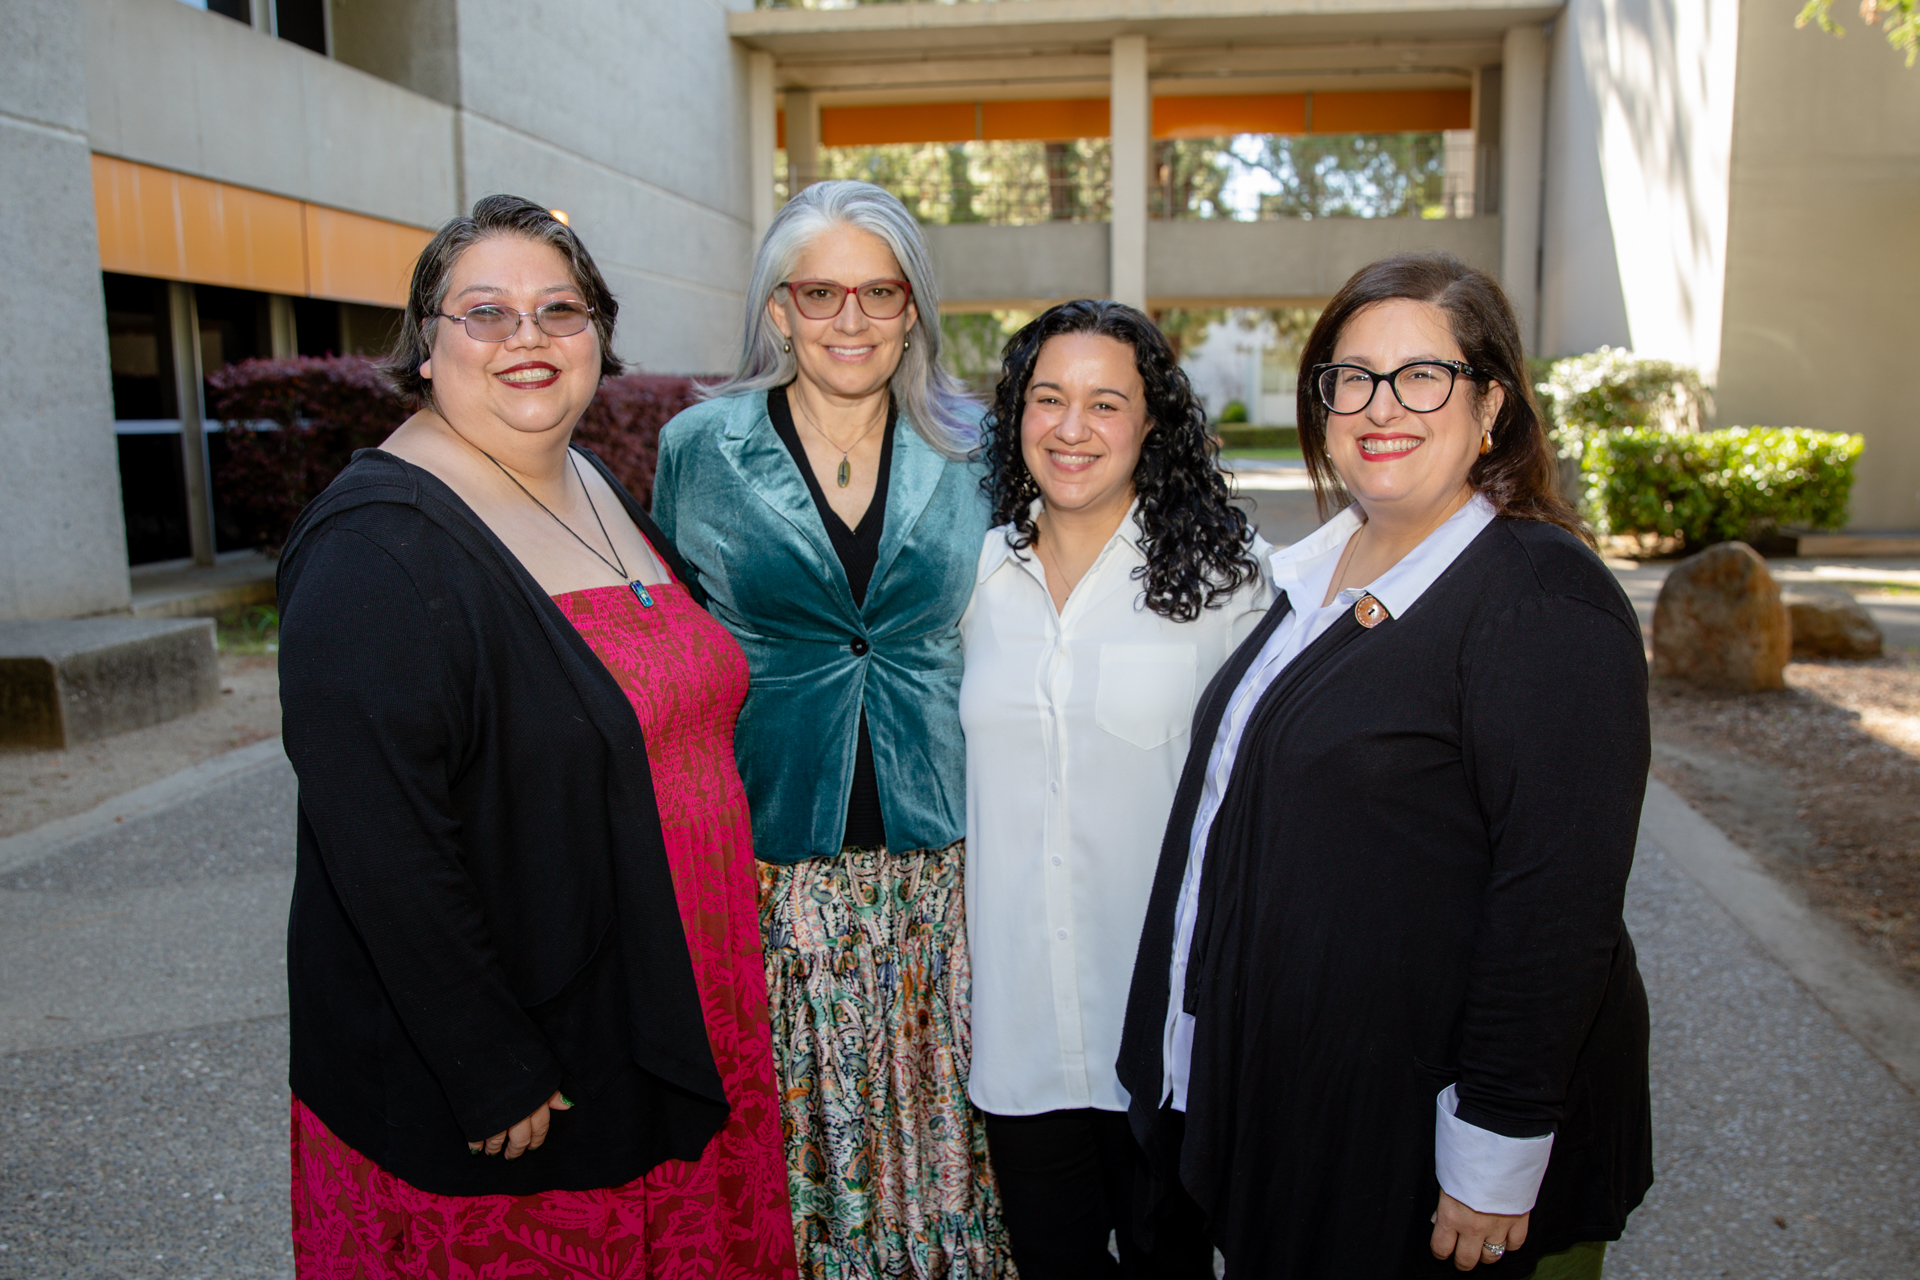 Four Sac State faculty pose for a photo outdoors.